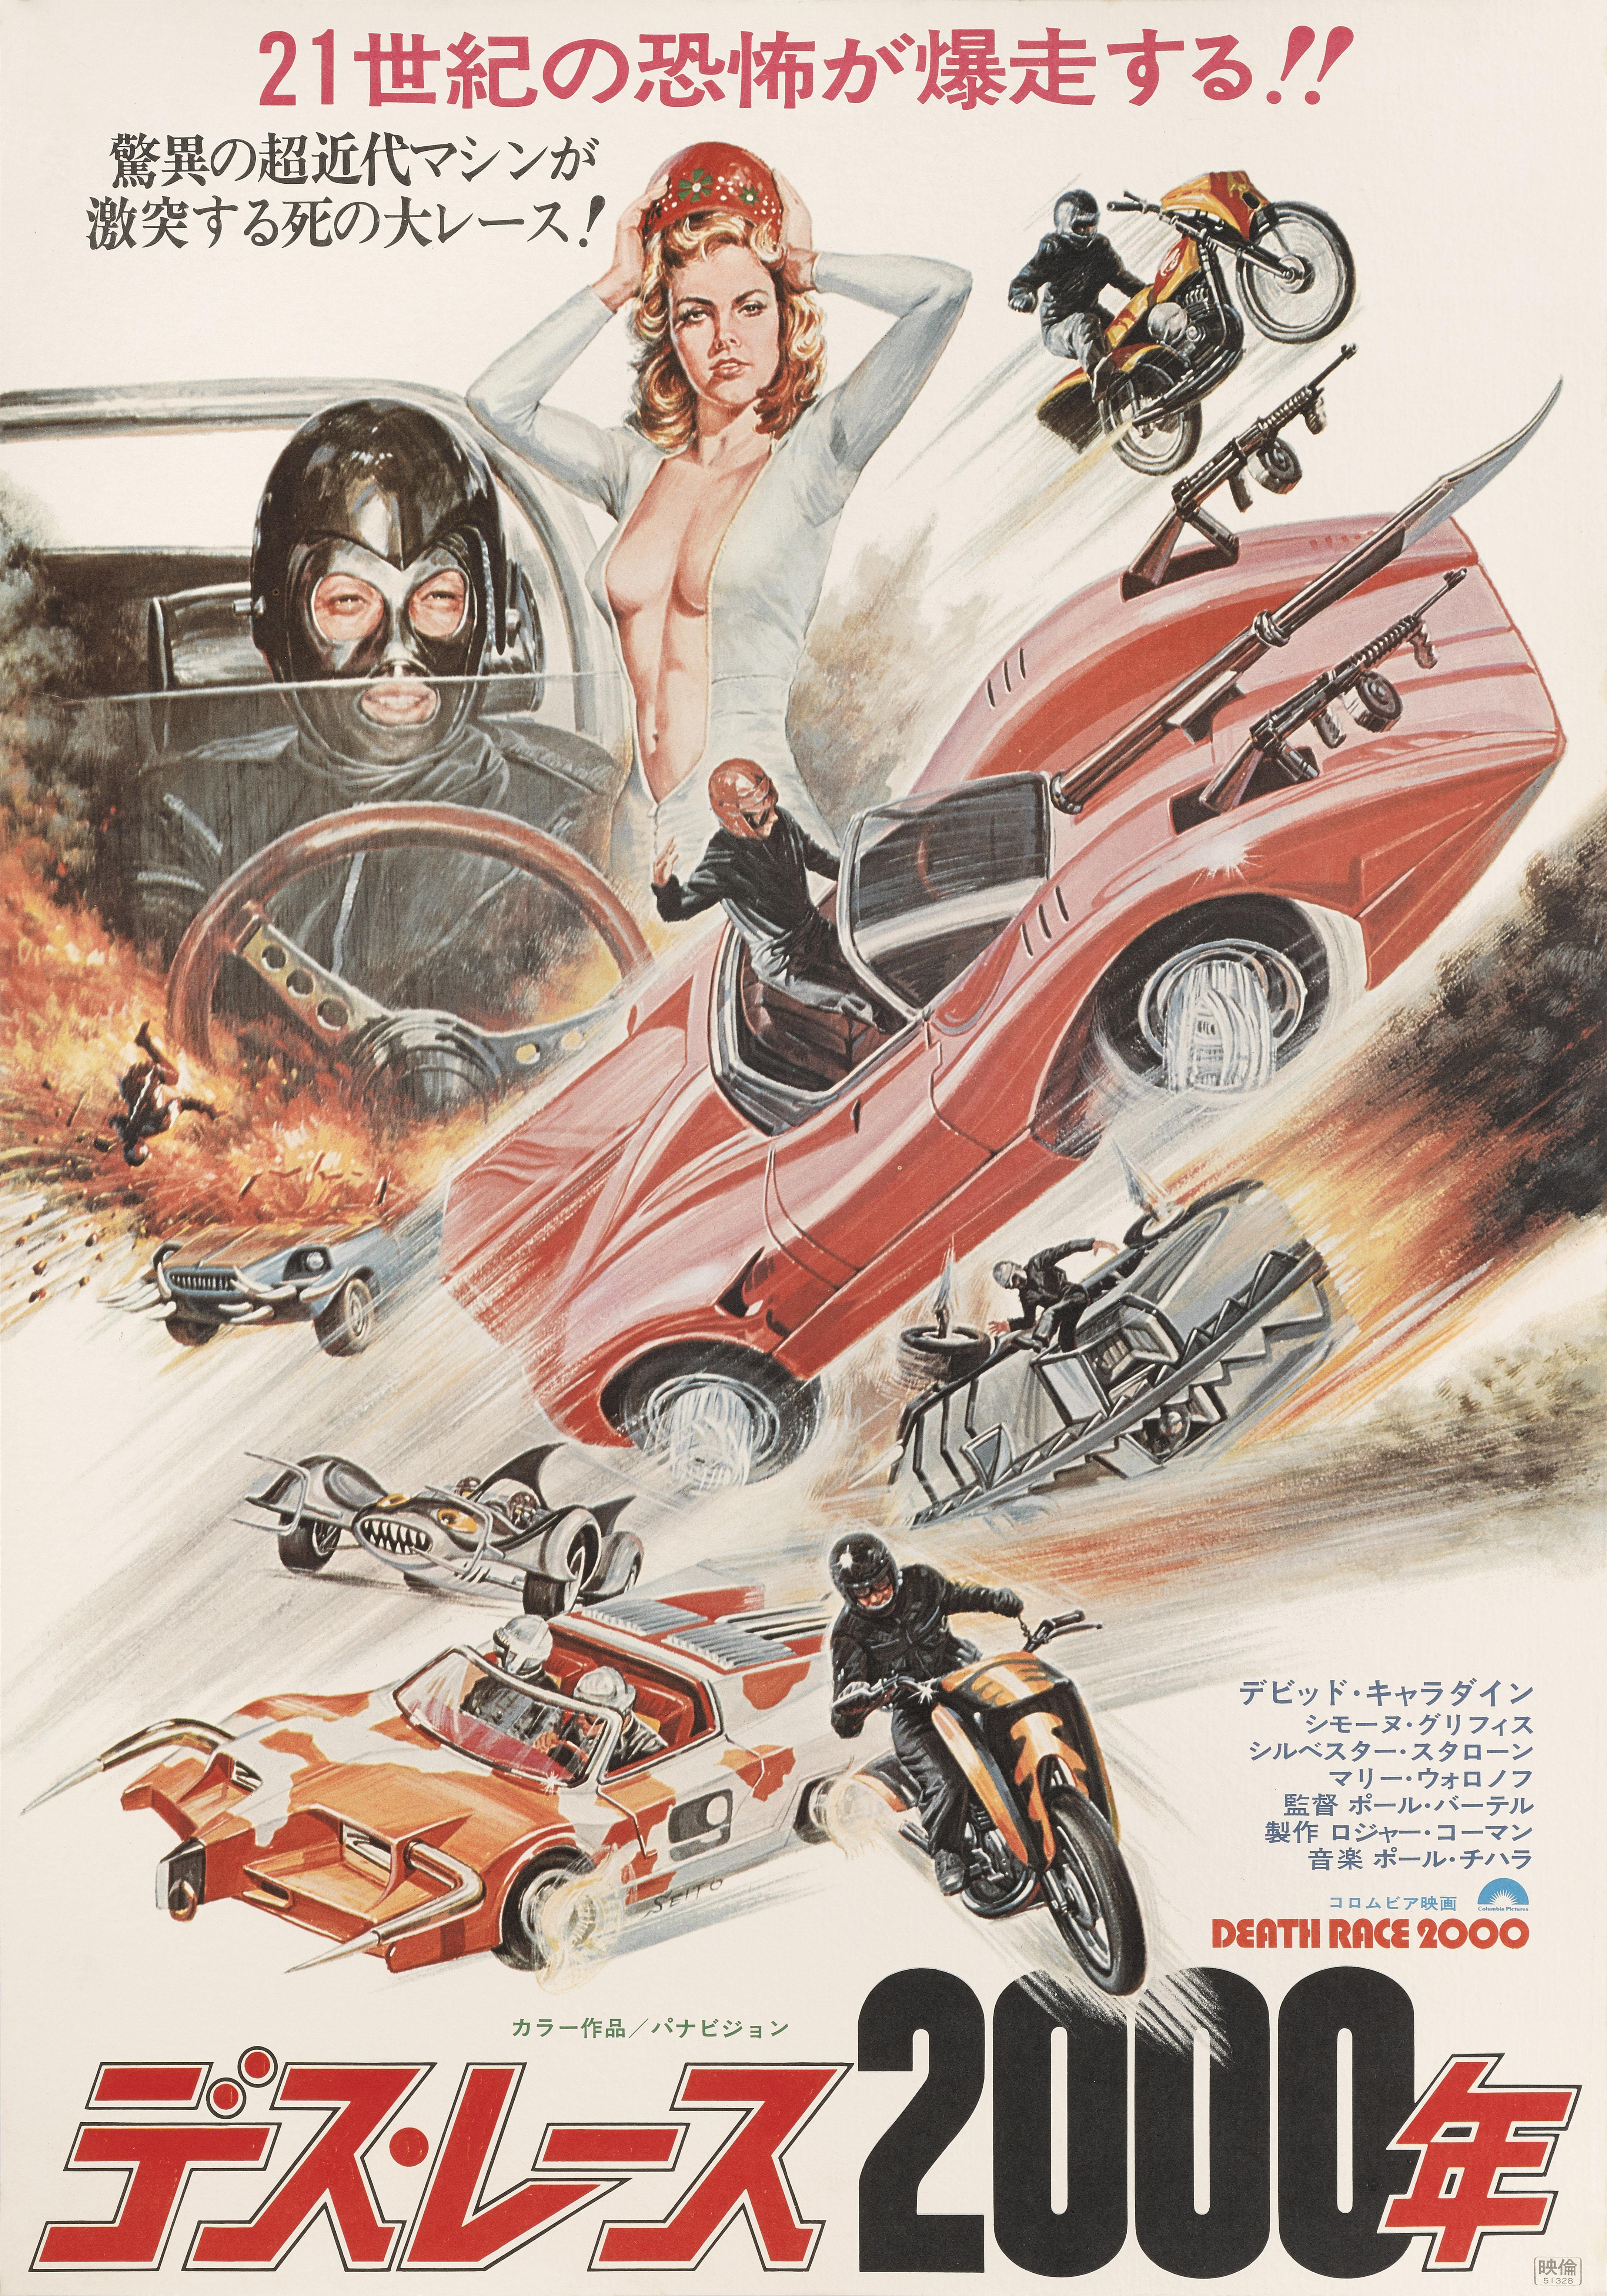 Original Japanese film poster for Death Race 2000.
This poster was created for the films first Japanese release in 1977
The film stared David Carradine, Sylvester Stallone and Simone Griffeth
and was directed by Paul Bartel.
The poster is